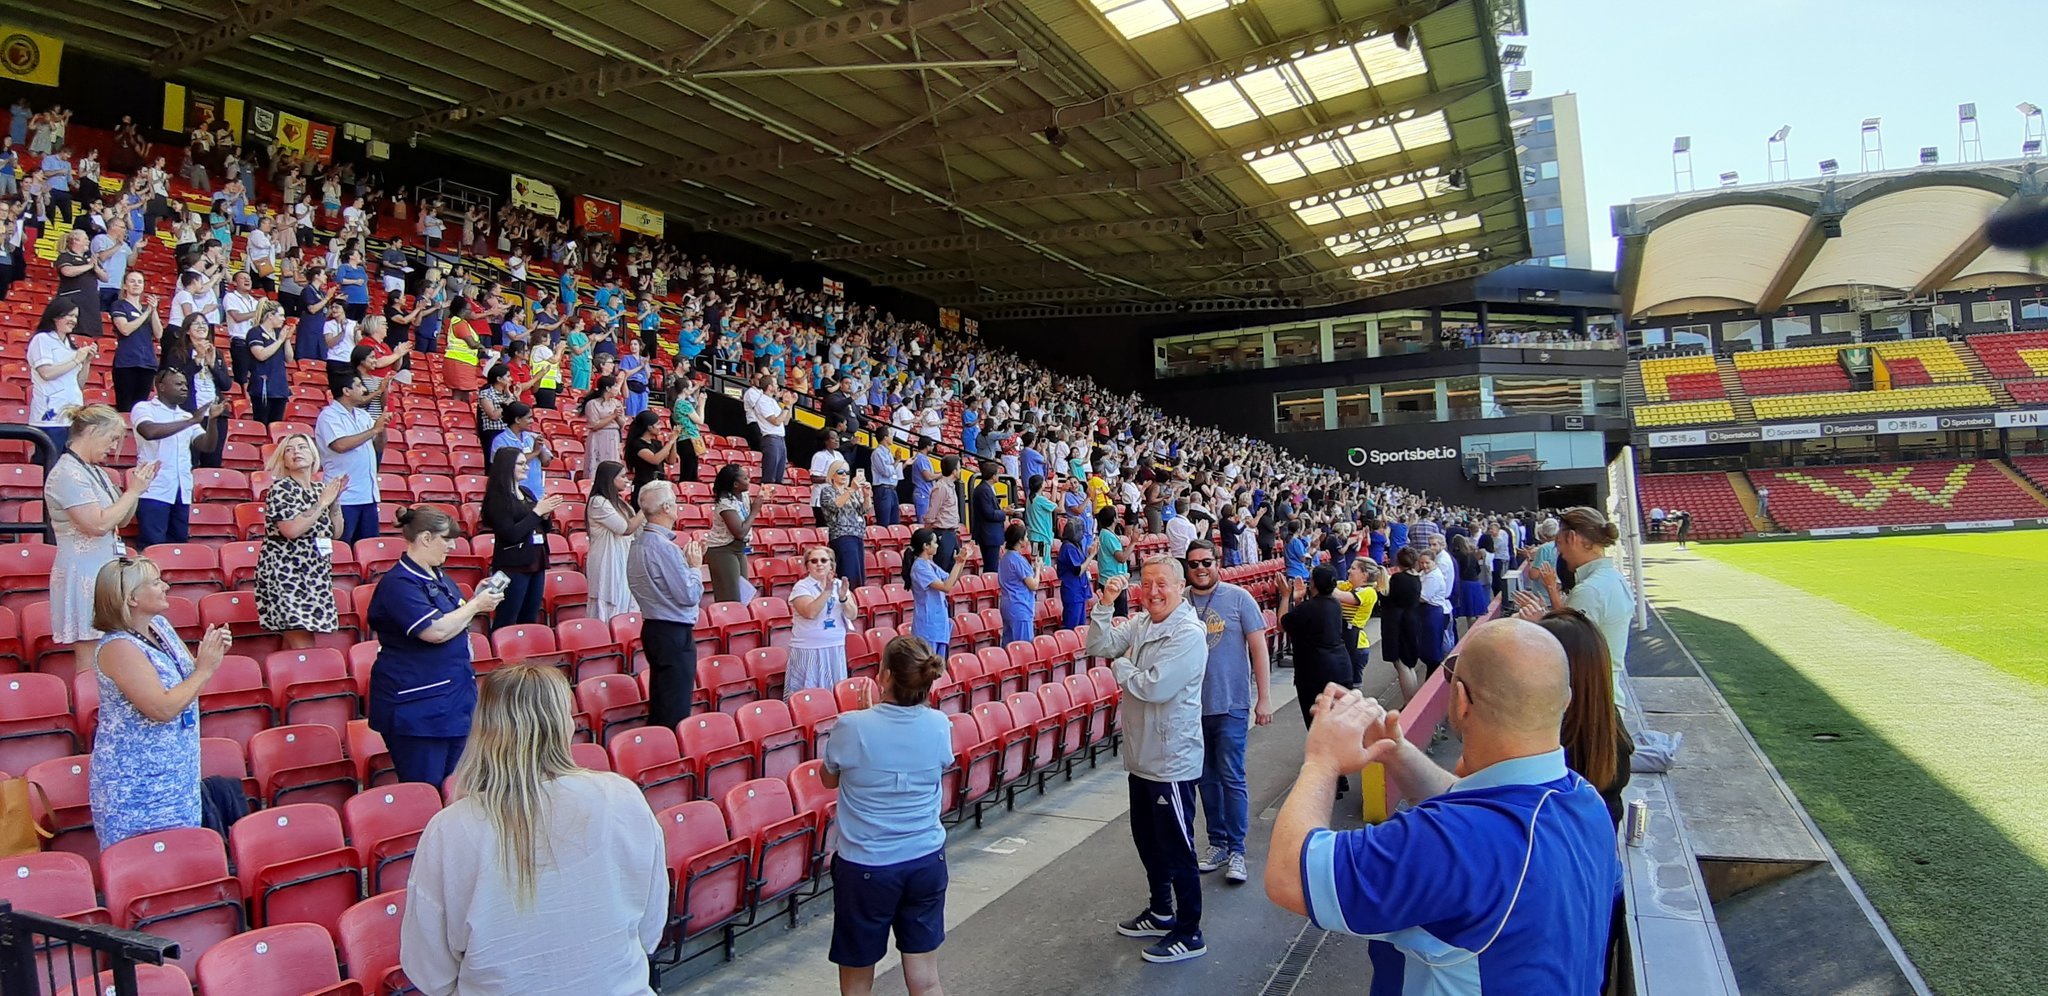 Hospital staff at Vicarage Road stadium in the spring. Credit: Anthony Matthews